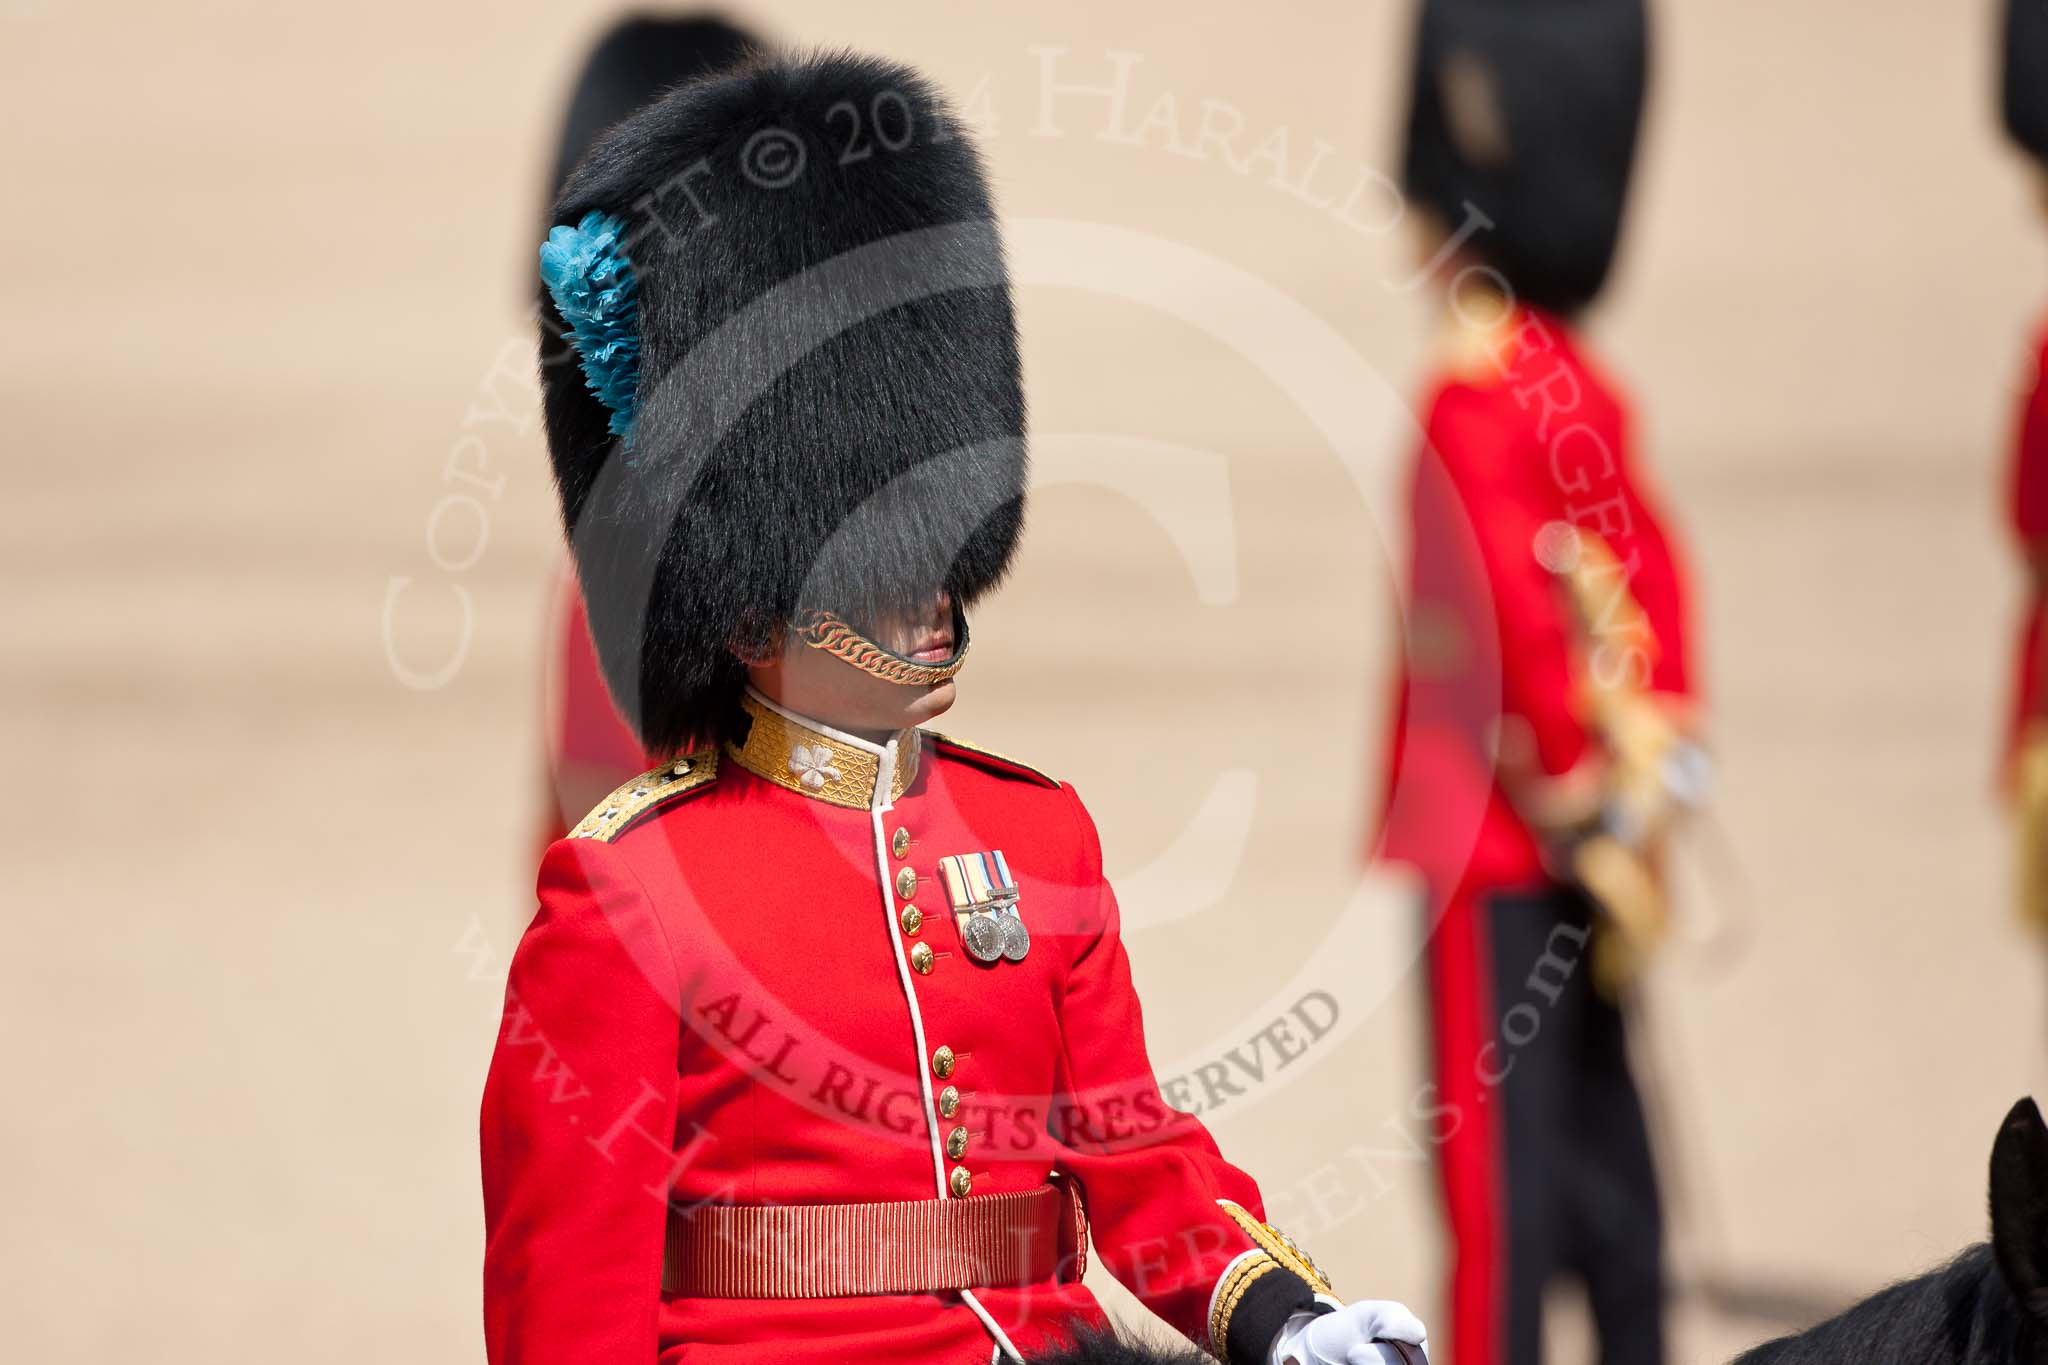 Trooping the Colour 2009: The Adjutant of the Parade, Captain J R H L Bullock-Webster, Irish Guards..
Horse Guards Parade, Westminster,
London SW1,

United Kingdom,
on 13 June 2009 at 10:38, image #72